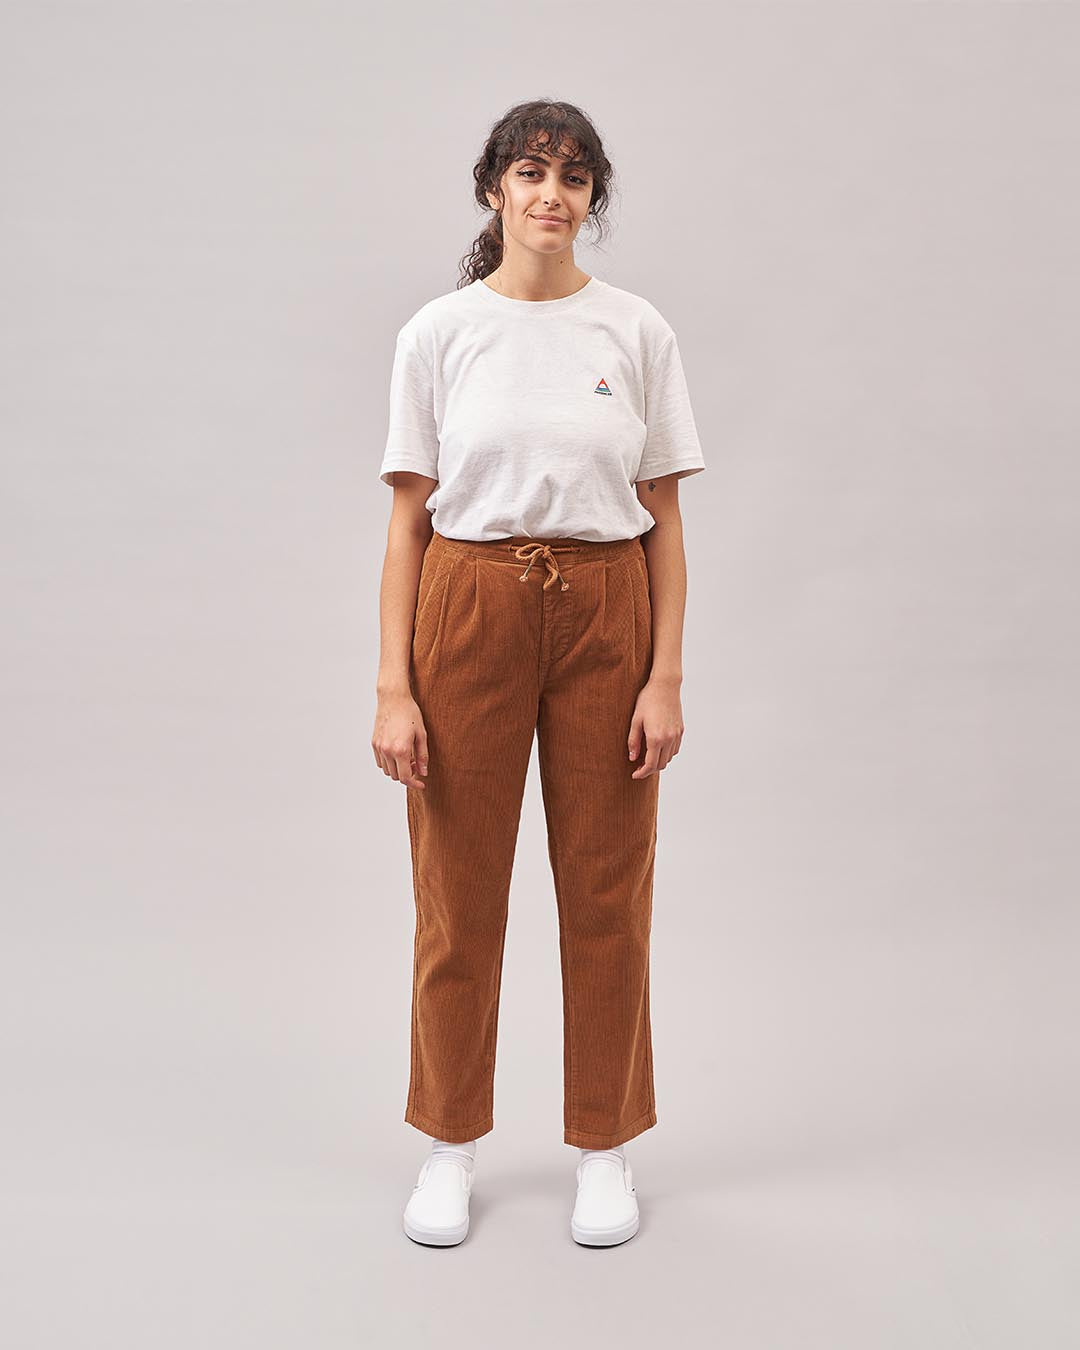 Compass Recycled Corduroy Trouser - Coconut